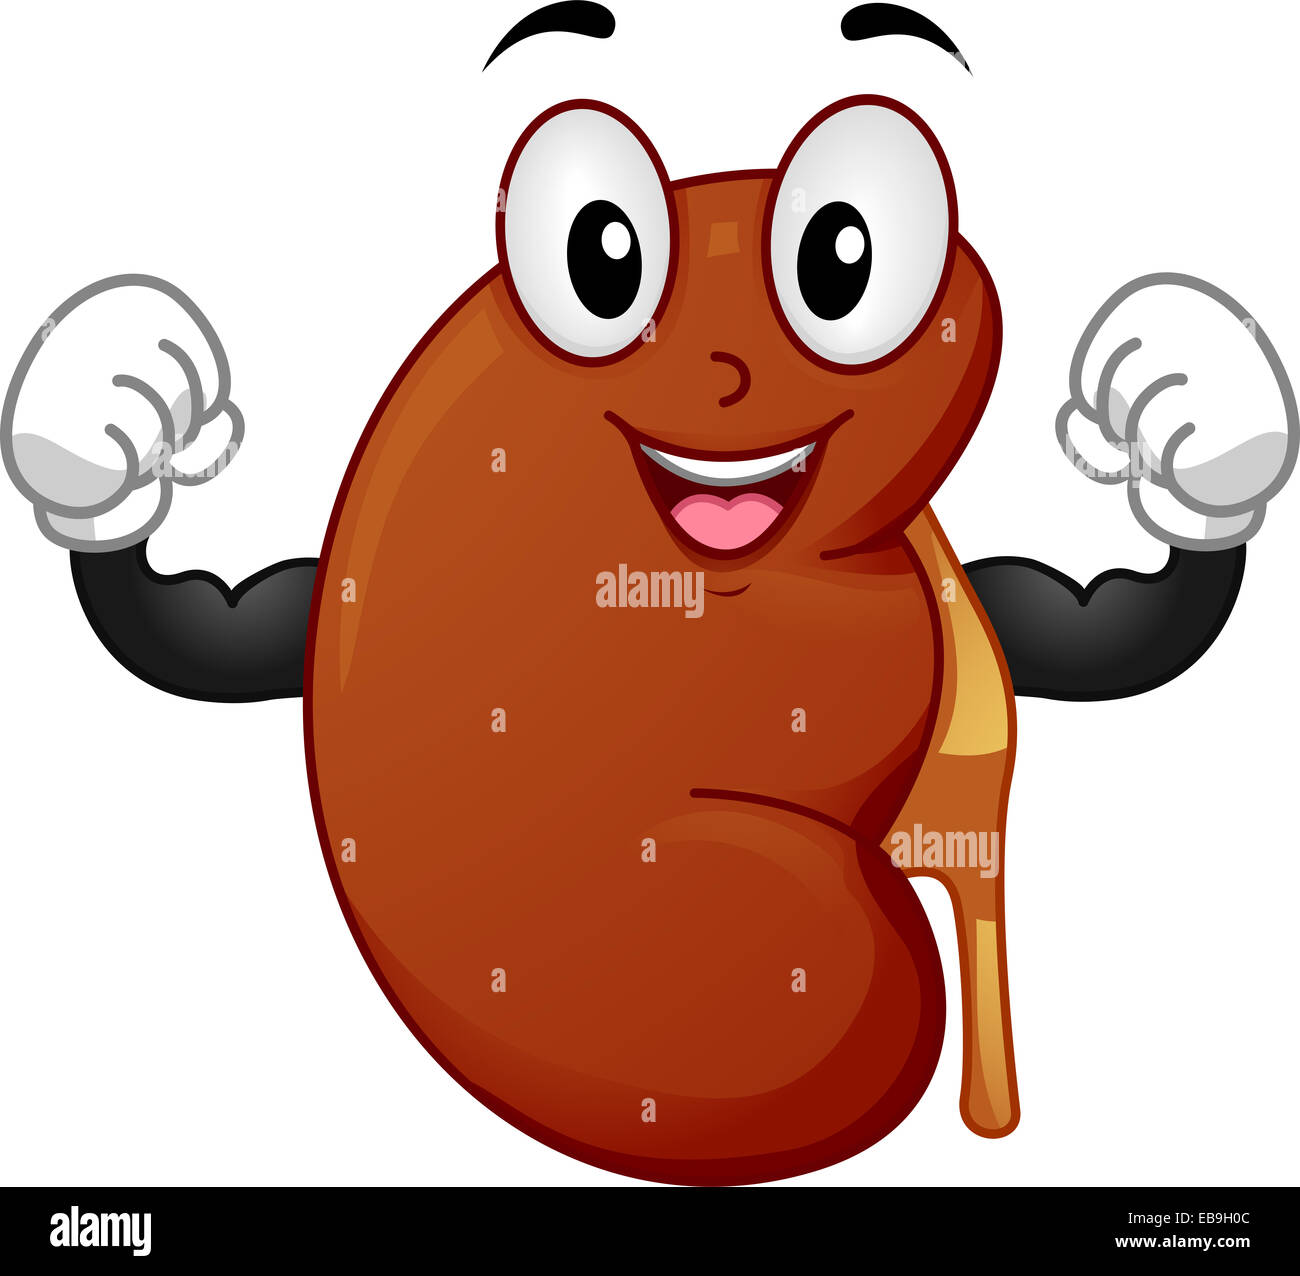 Mascot Illustration Featuring a Strong Kidney Flexing its Muscles Stock Photo